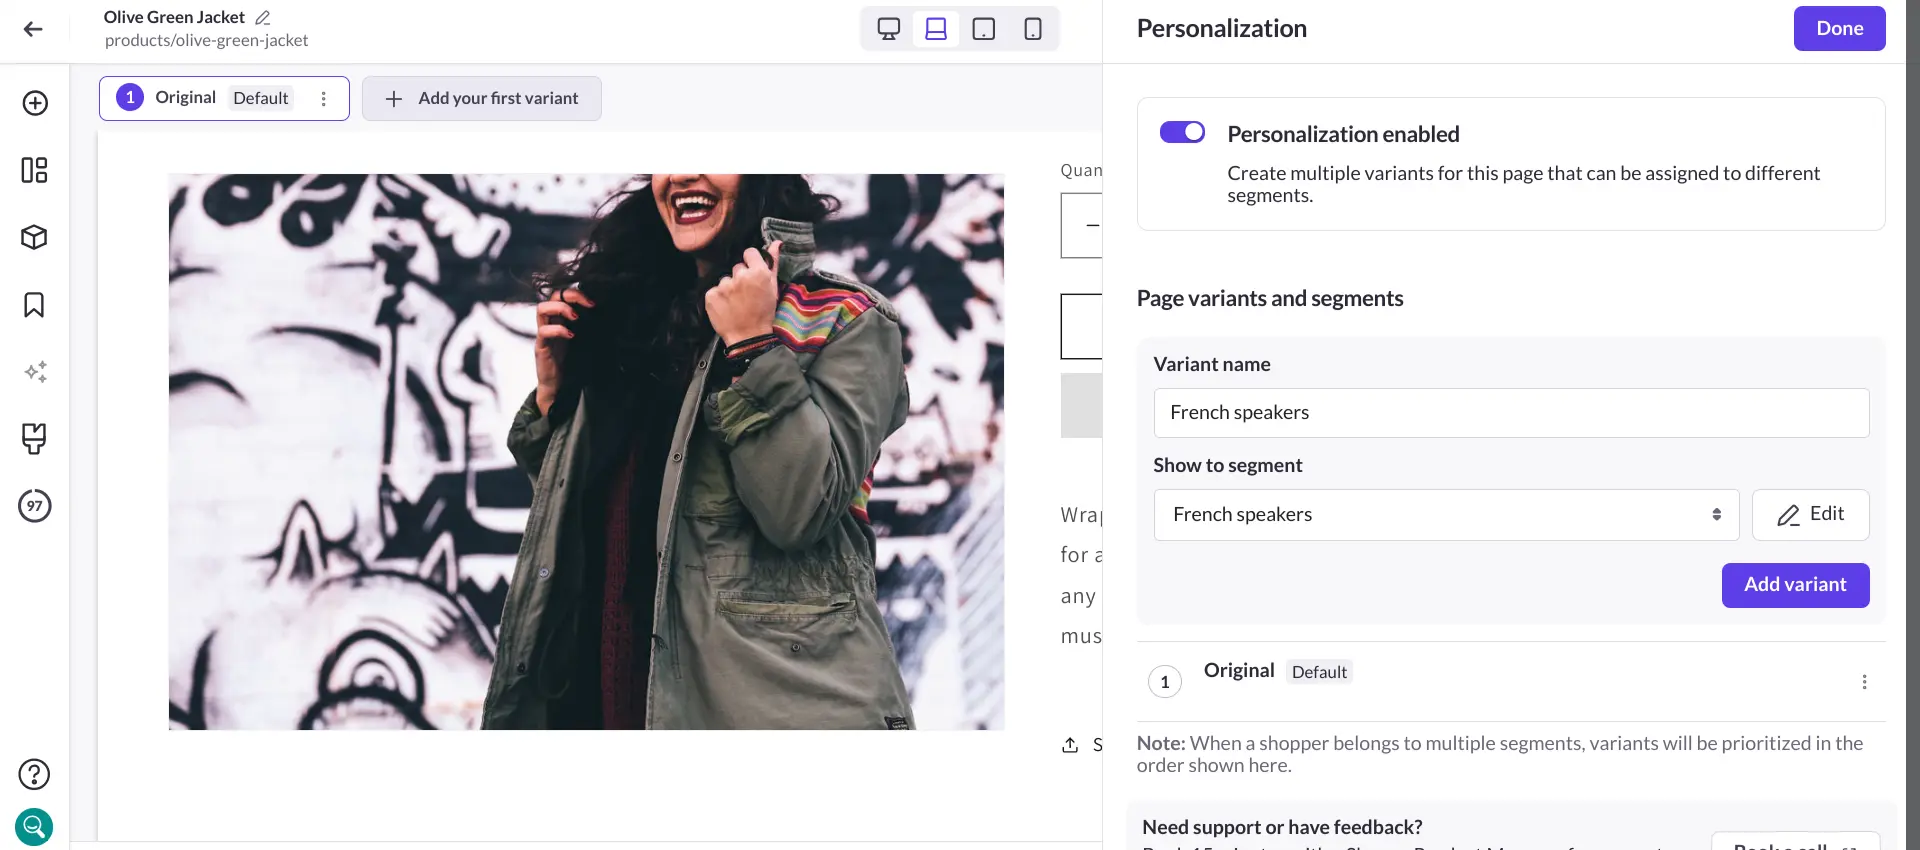 With Personalization, you can create a page variant in Shogun’s visual editor that is only shown to a segment of your visitors.